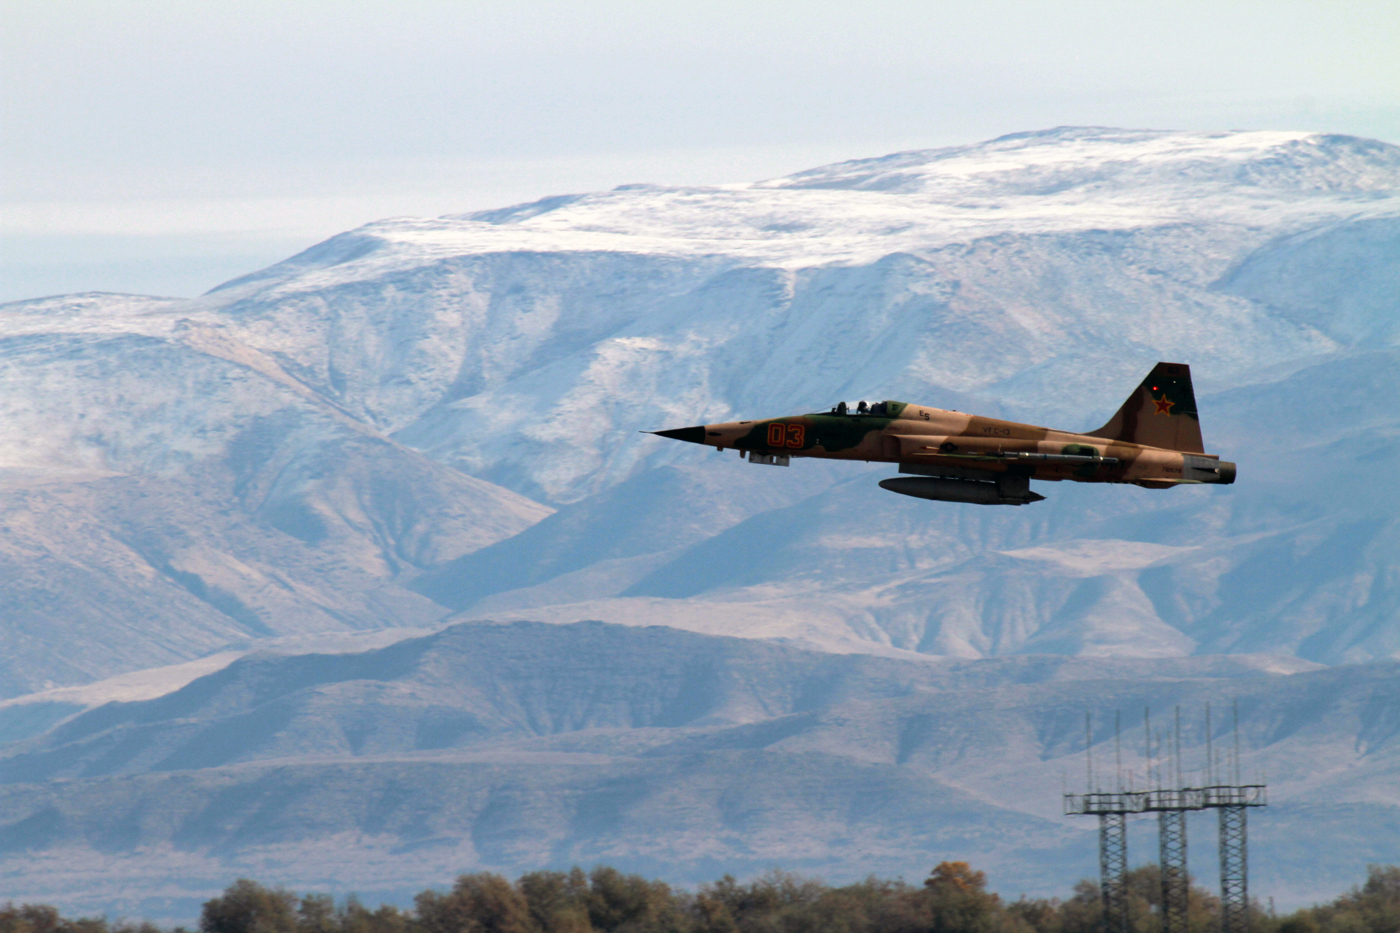 An F-5 Tiger II from the Saints of Fighter Squadron Composite (VFC) 13 takes off from a runway on Naval Air Station Fallon on Nov. 4, 2014. US Navy Photo